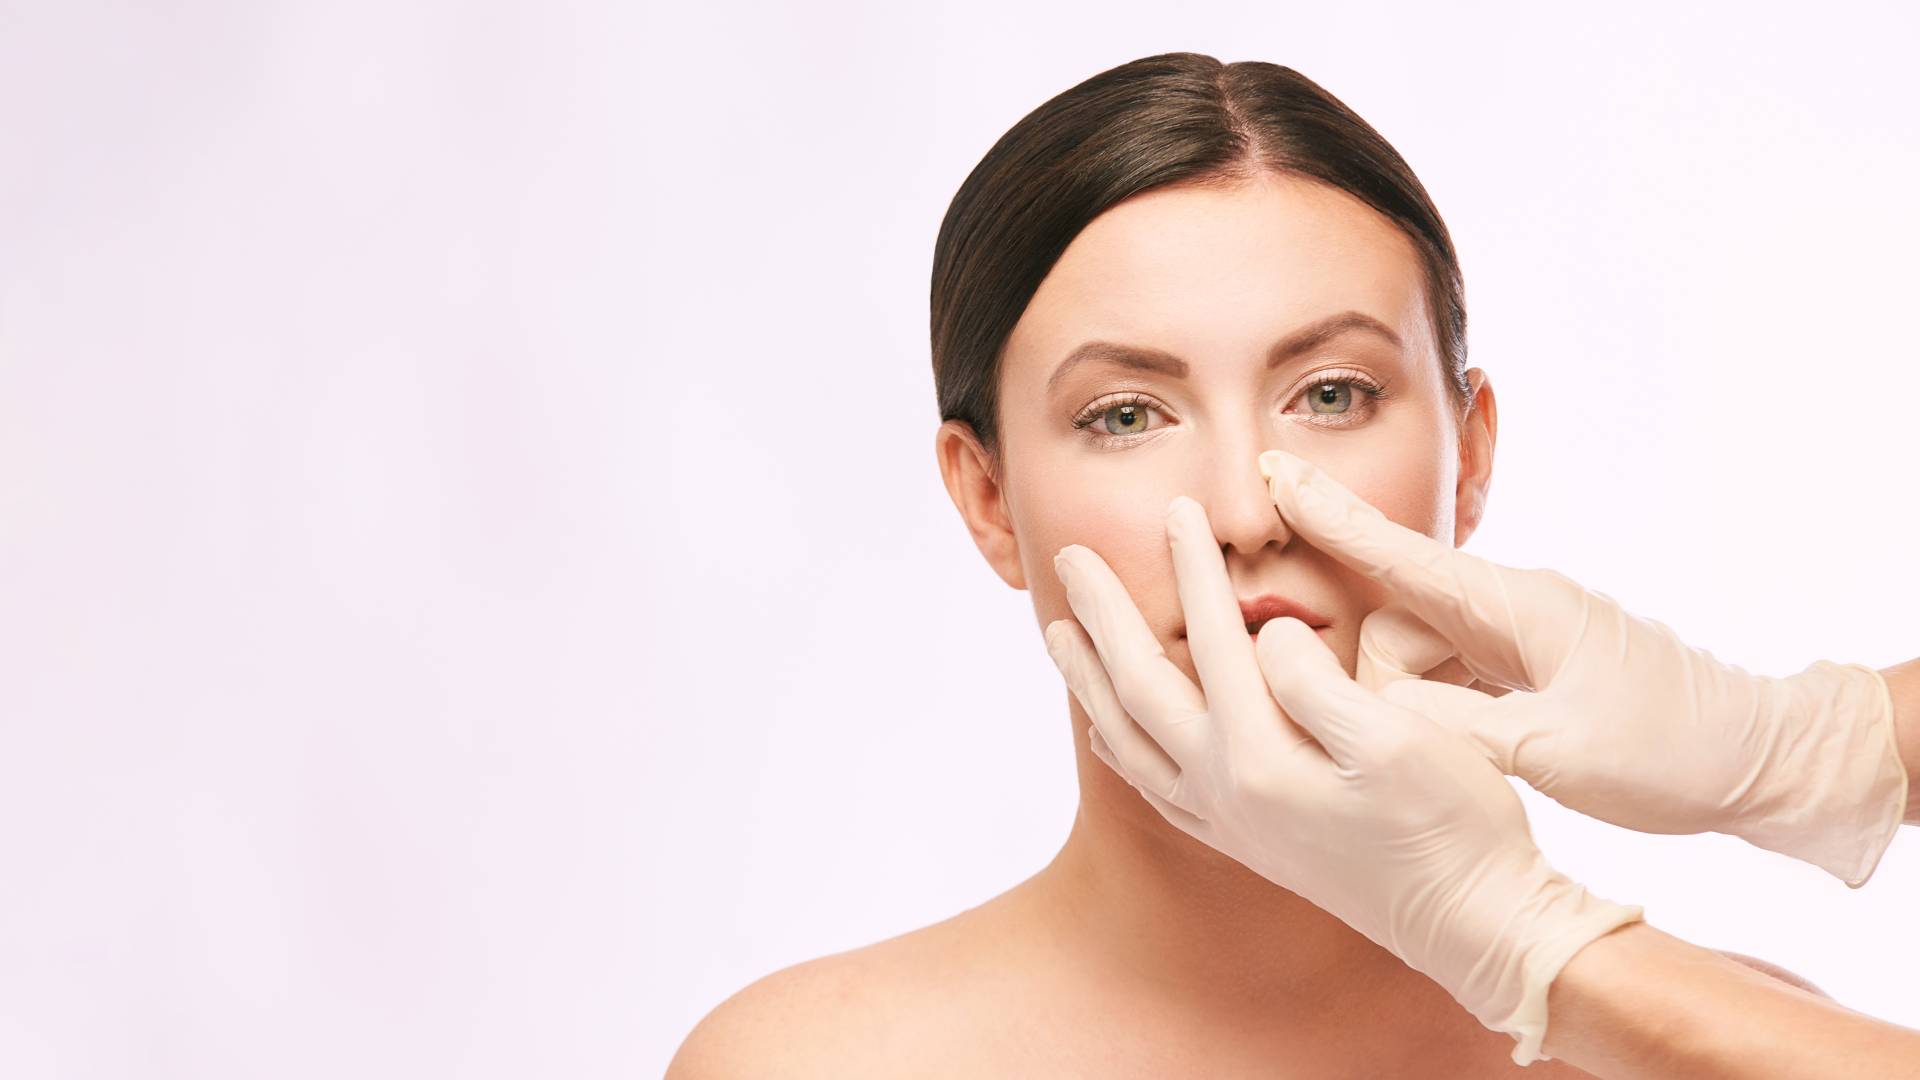 All You Need to Know About Septoplasty